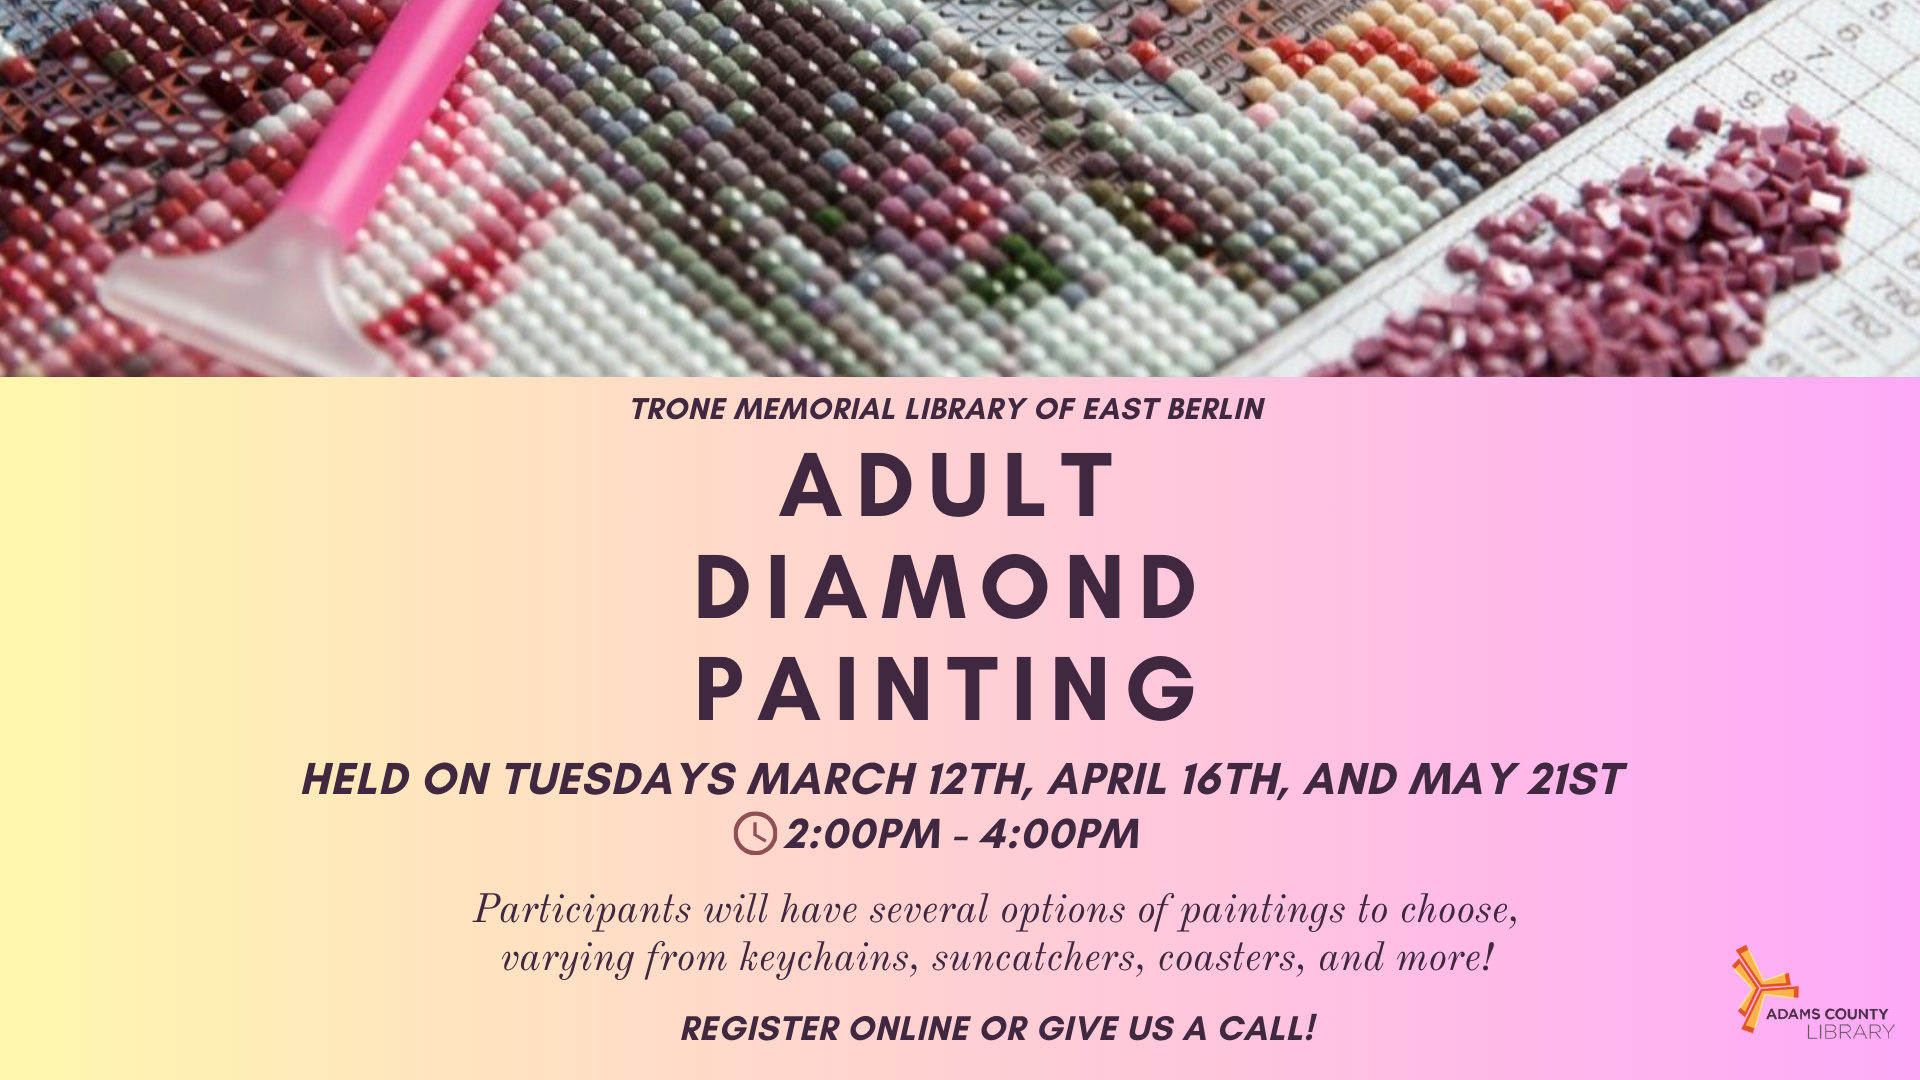 Flyer with information for Adult Diamond Painting.